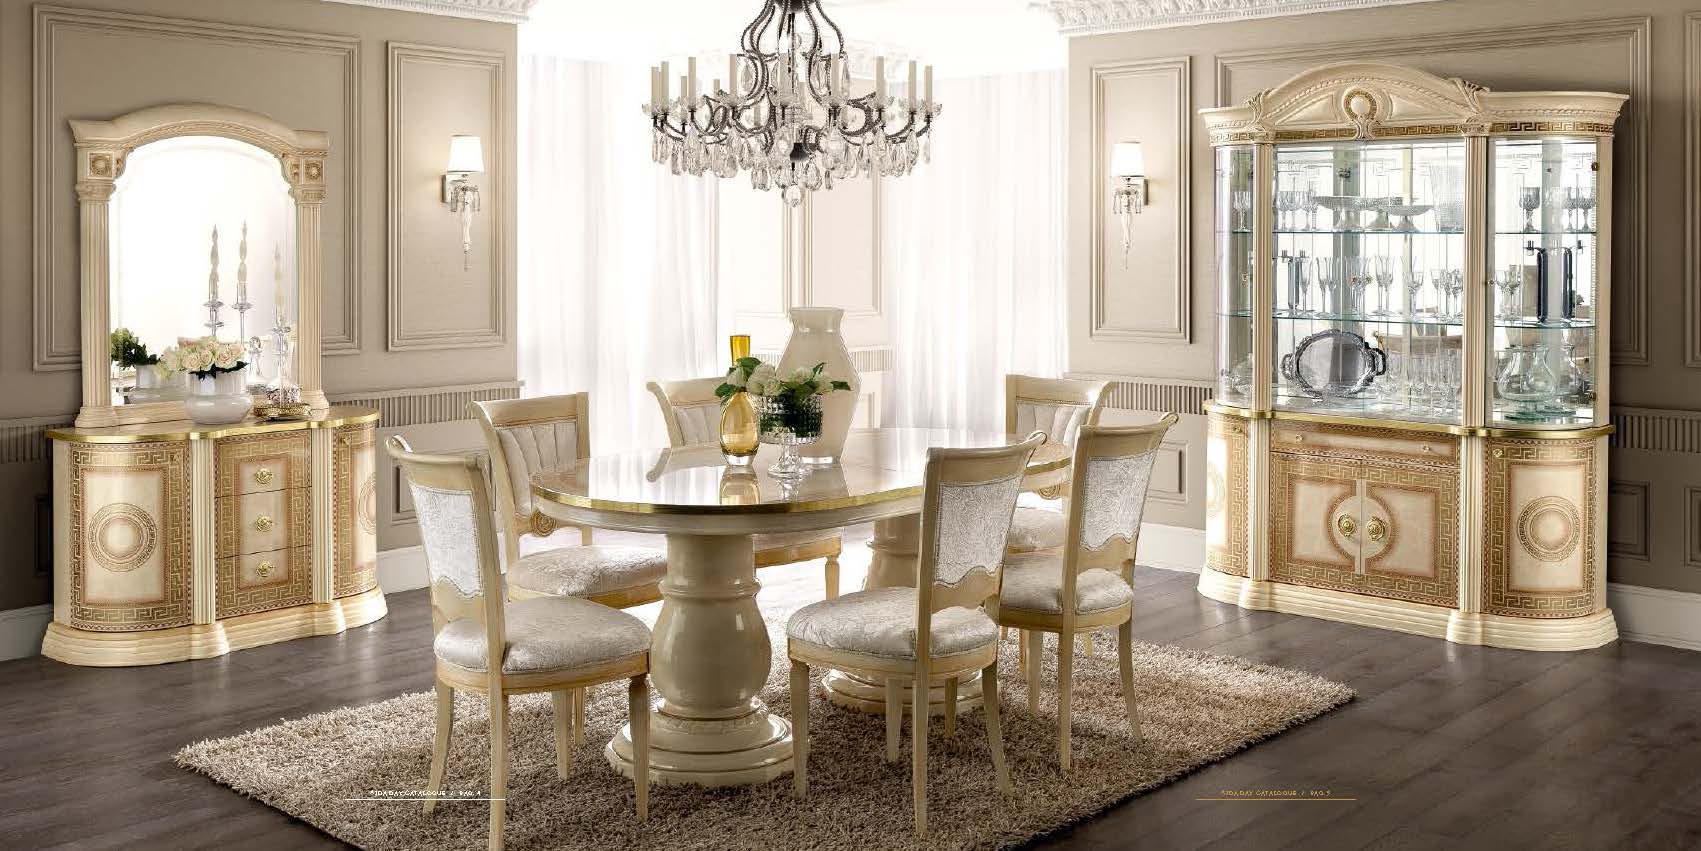 Dining Room Furniture Marble-Look Tables Aida Dining Additional Items